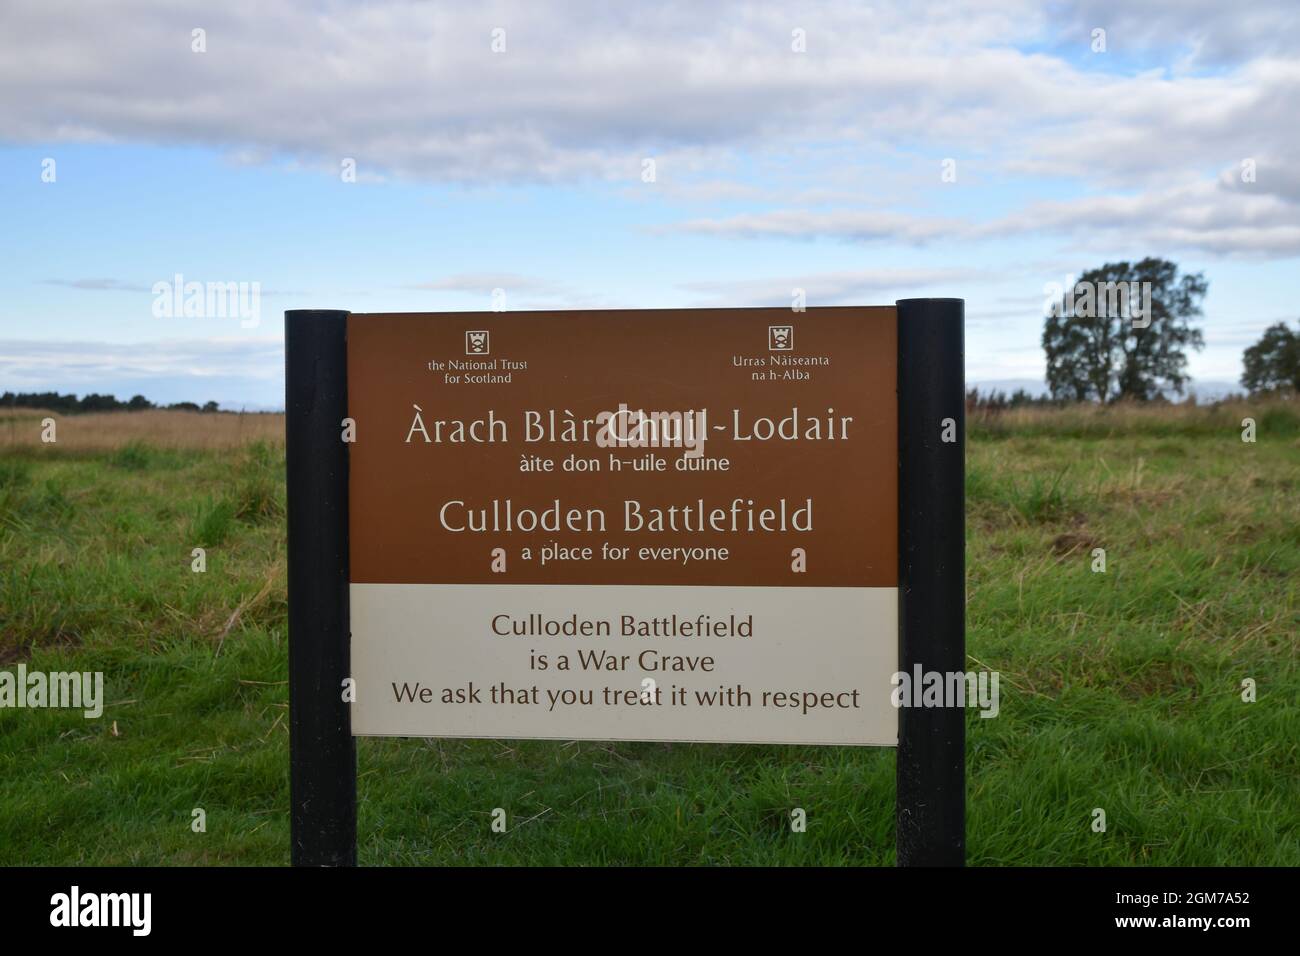 Sign for Culloden Battlefield with blurred background of field, trees, blue sky and clouds. Stock Photo